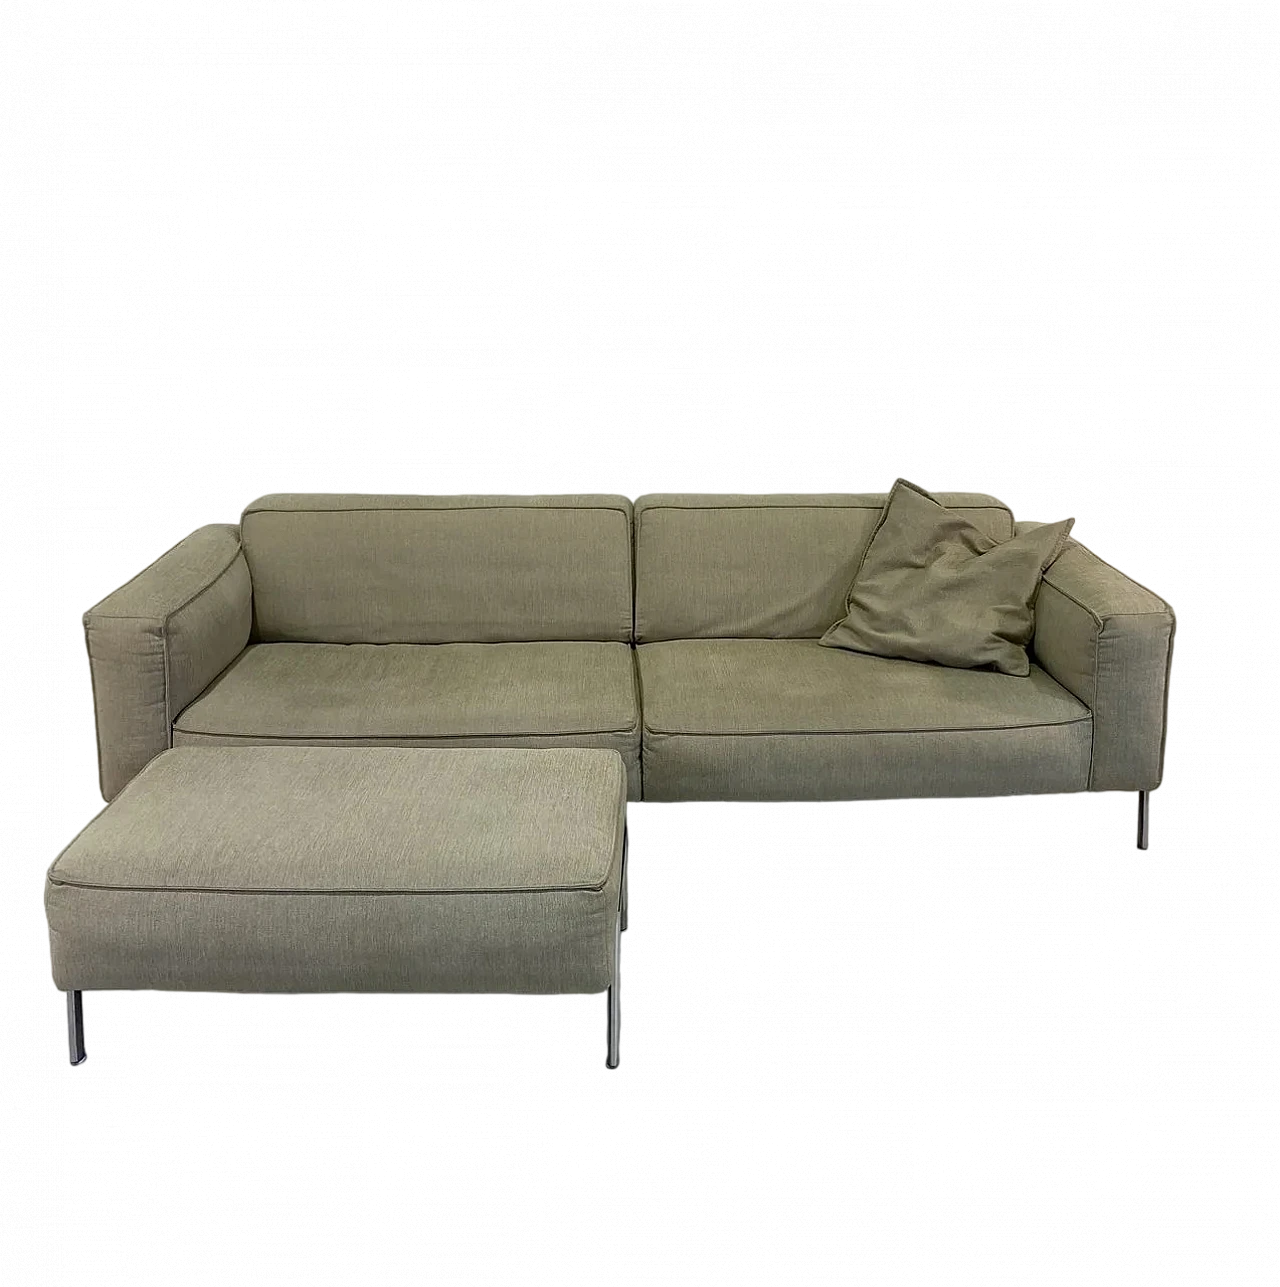 Bacio sofa and footstool by Cuno Frommherz for Rolf Benz 11